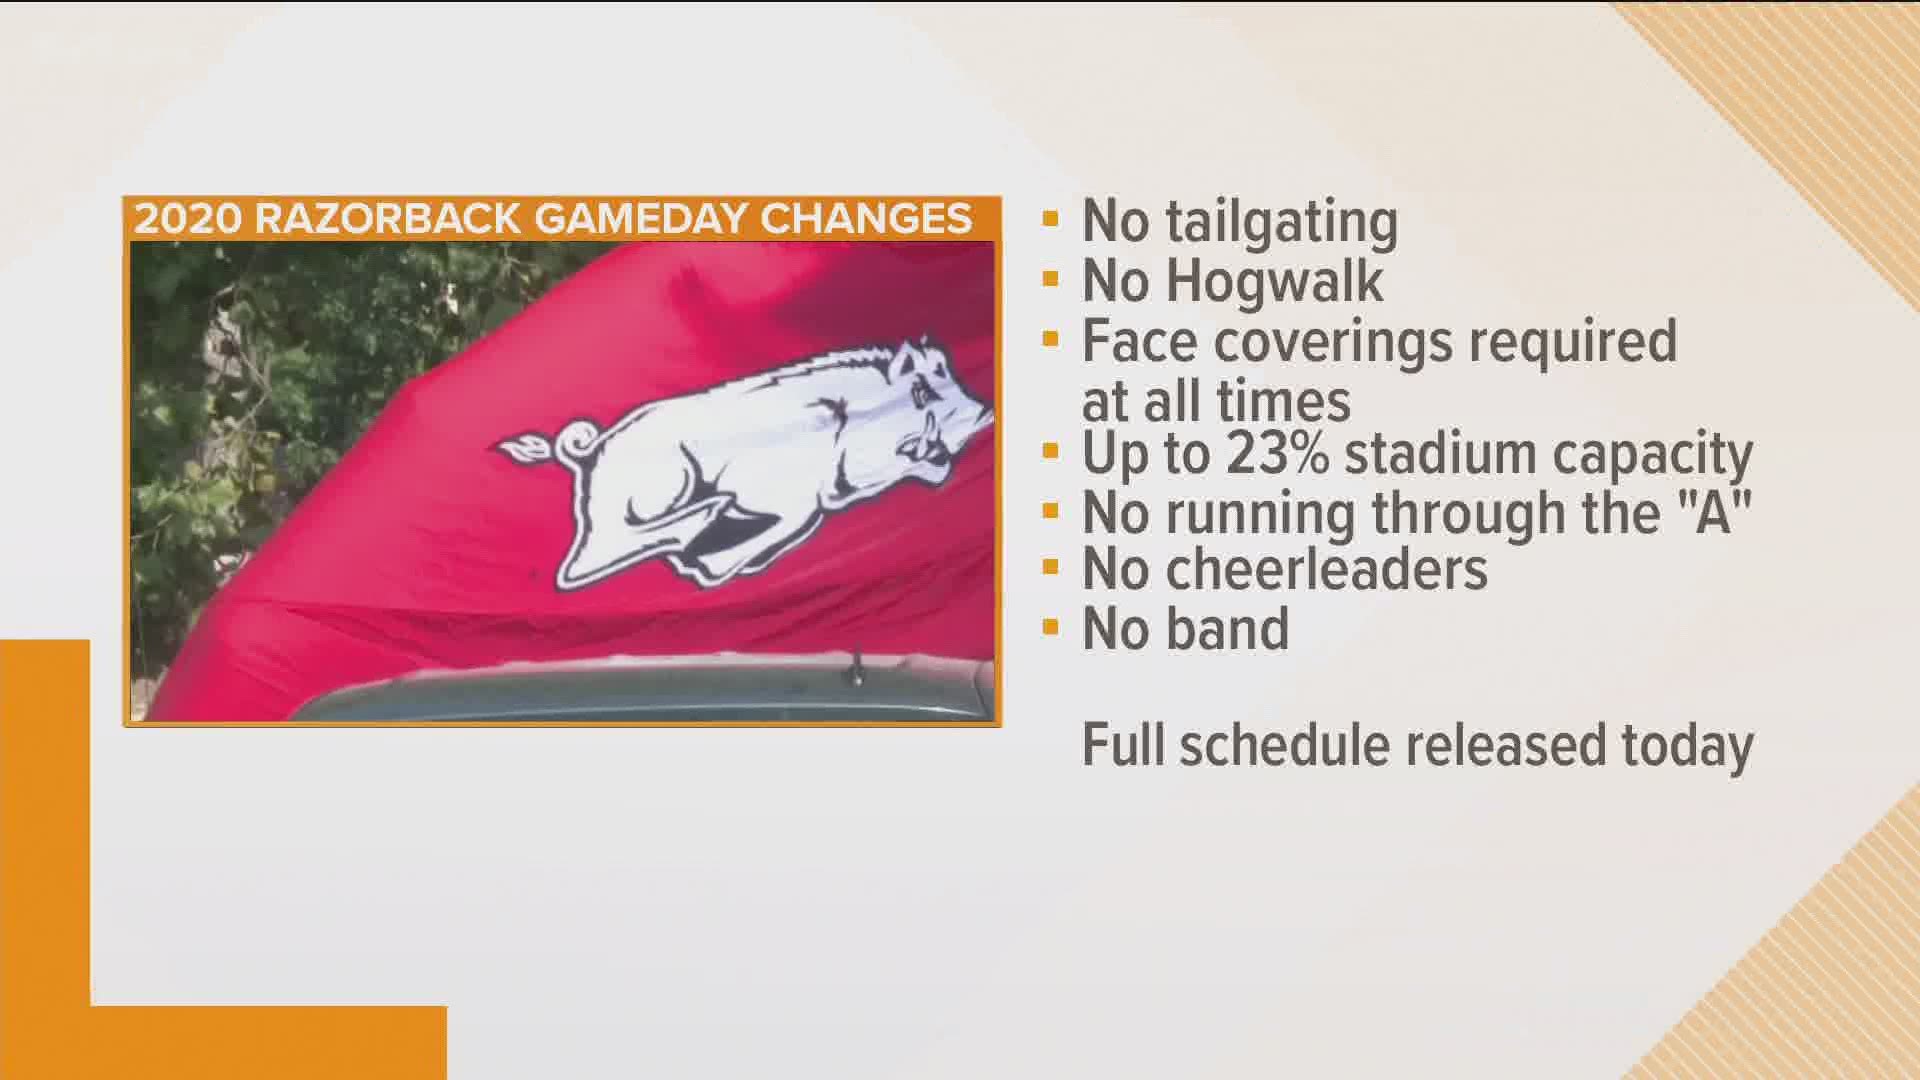 According to the University of Arkansas, there are major changes to the upcoming Razorback football games.